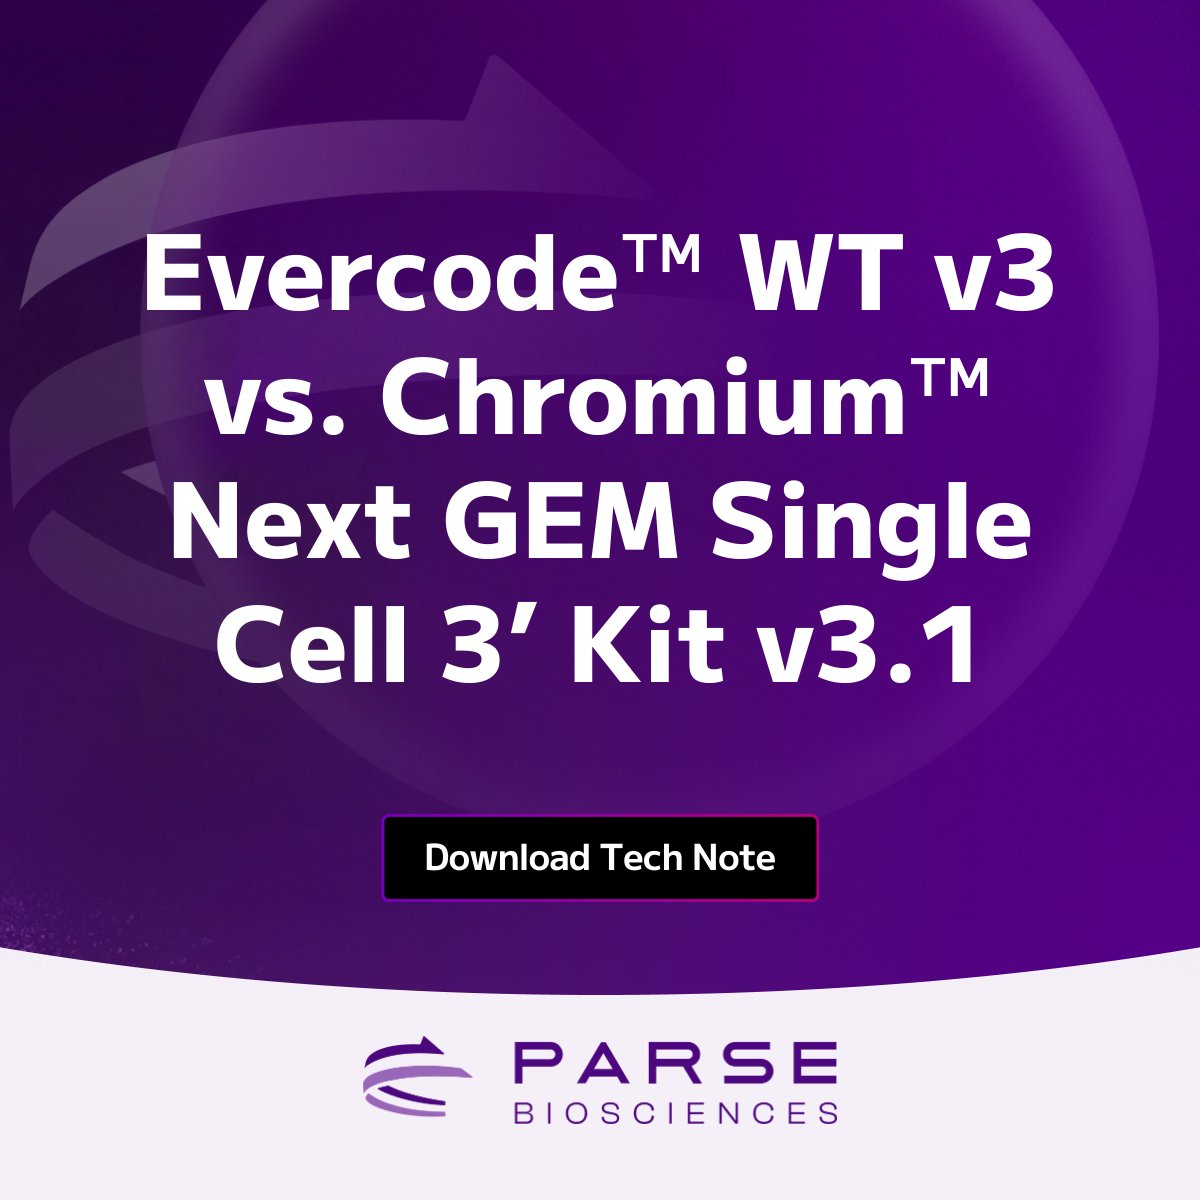 See how the new Evercode WT v3 stacks up against Chromium Next GEM Single Cell 3’ Kit v3.1 in mouse lymph node nuclei. Our latest tech note presents a head to head comparison of the two technologies. See the data ➡️ parse.bio/4a4QdjP #singlecell #research #technote